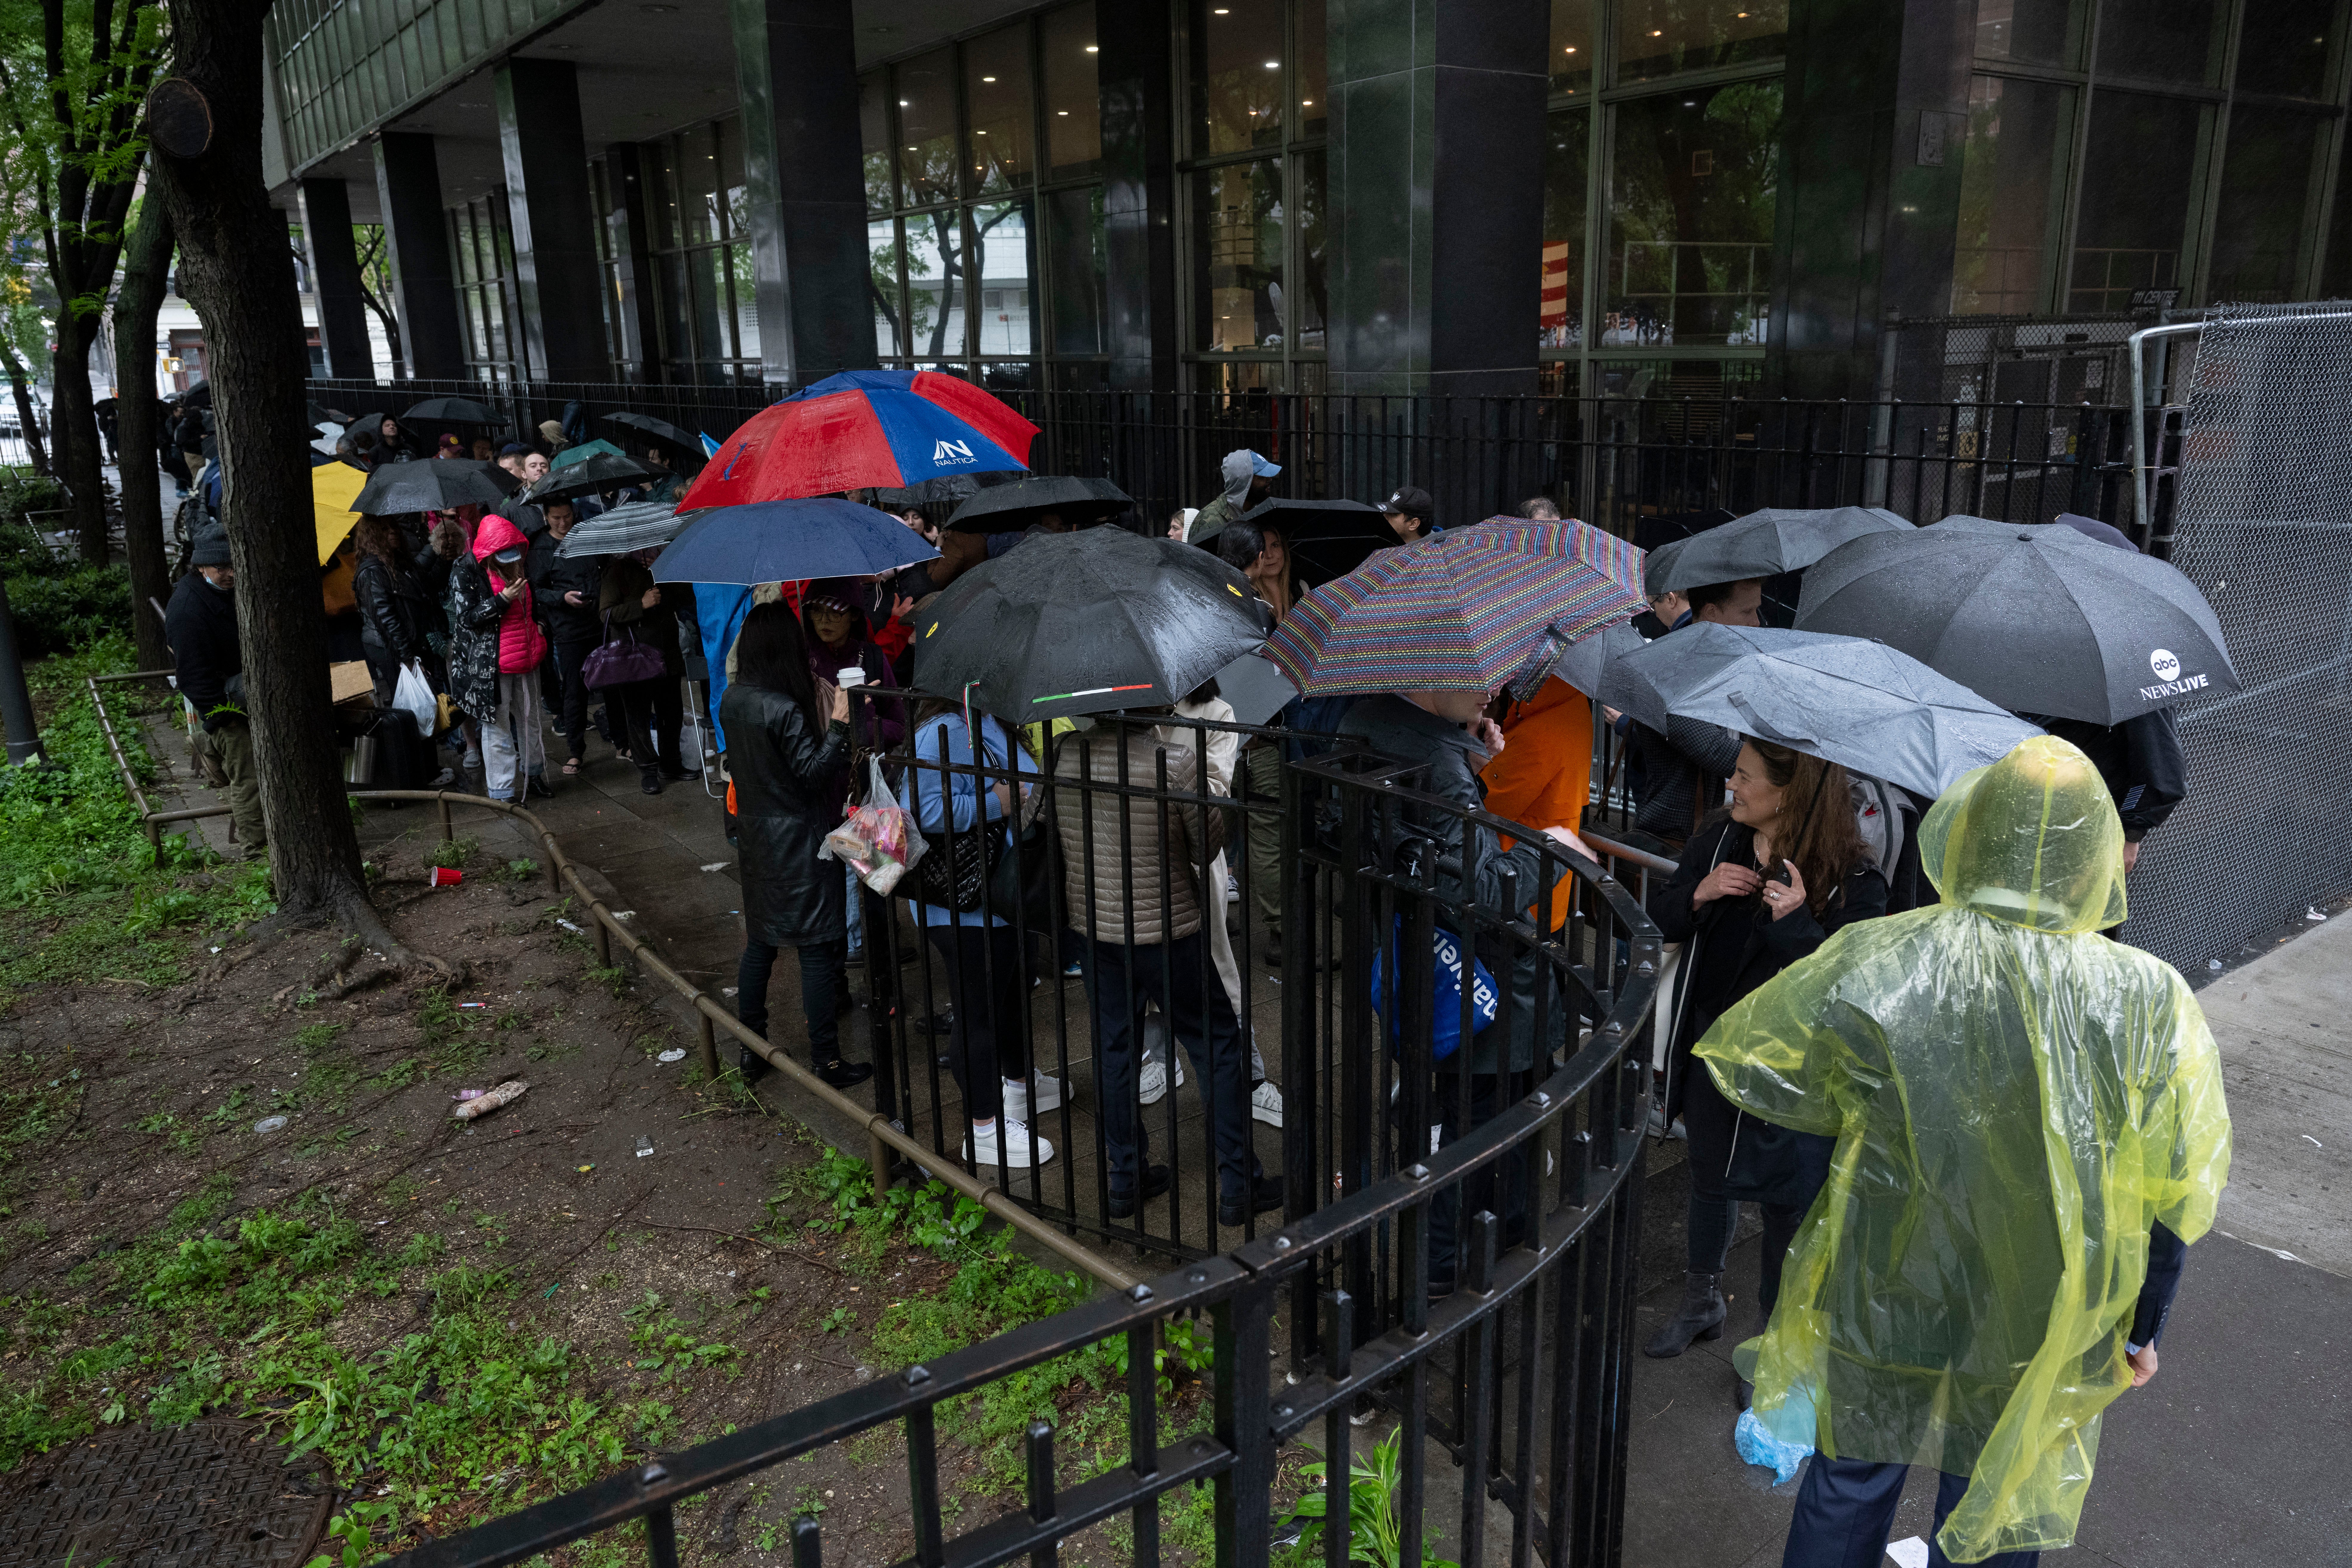 Reporters and members of the public line up across the street from a criminal courthouse in downtown Manhattan for a seat inside Donald Trump’s trial on May 16